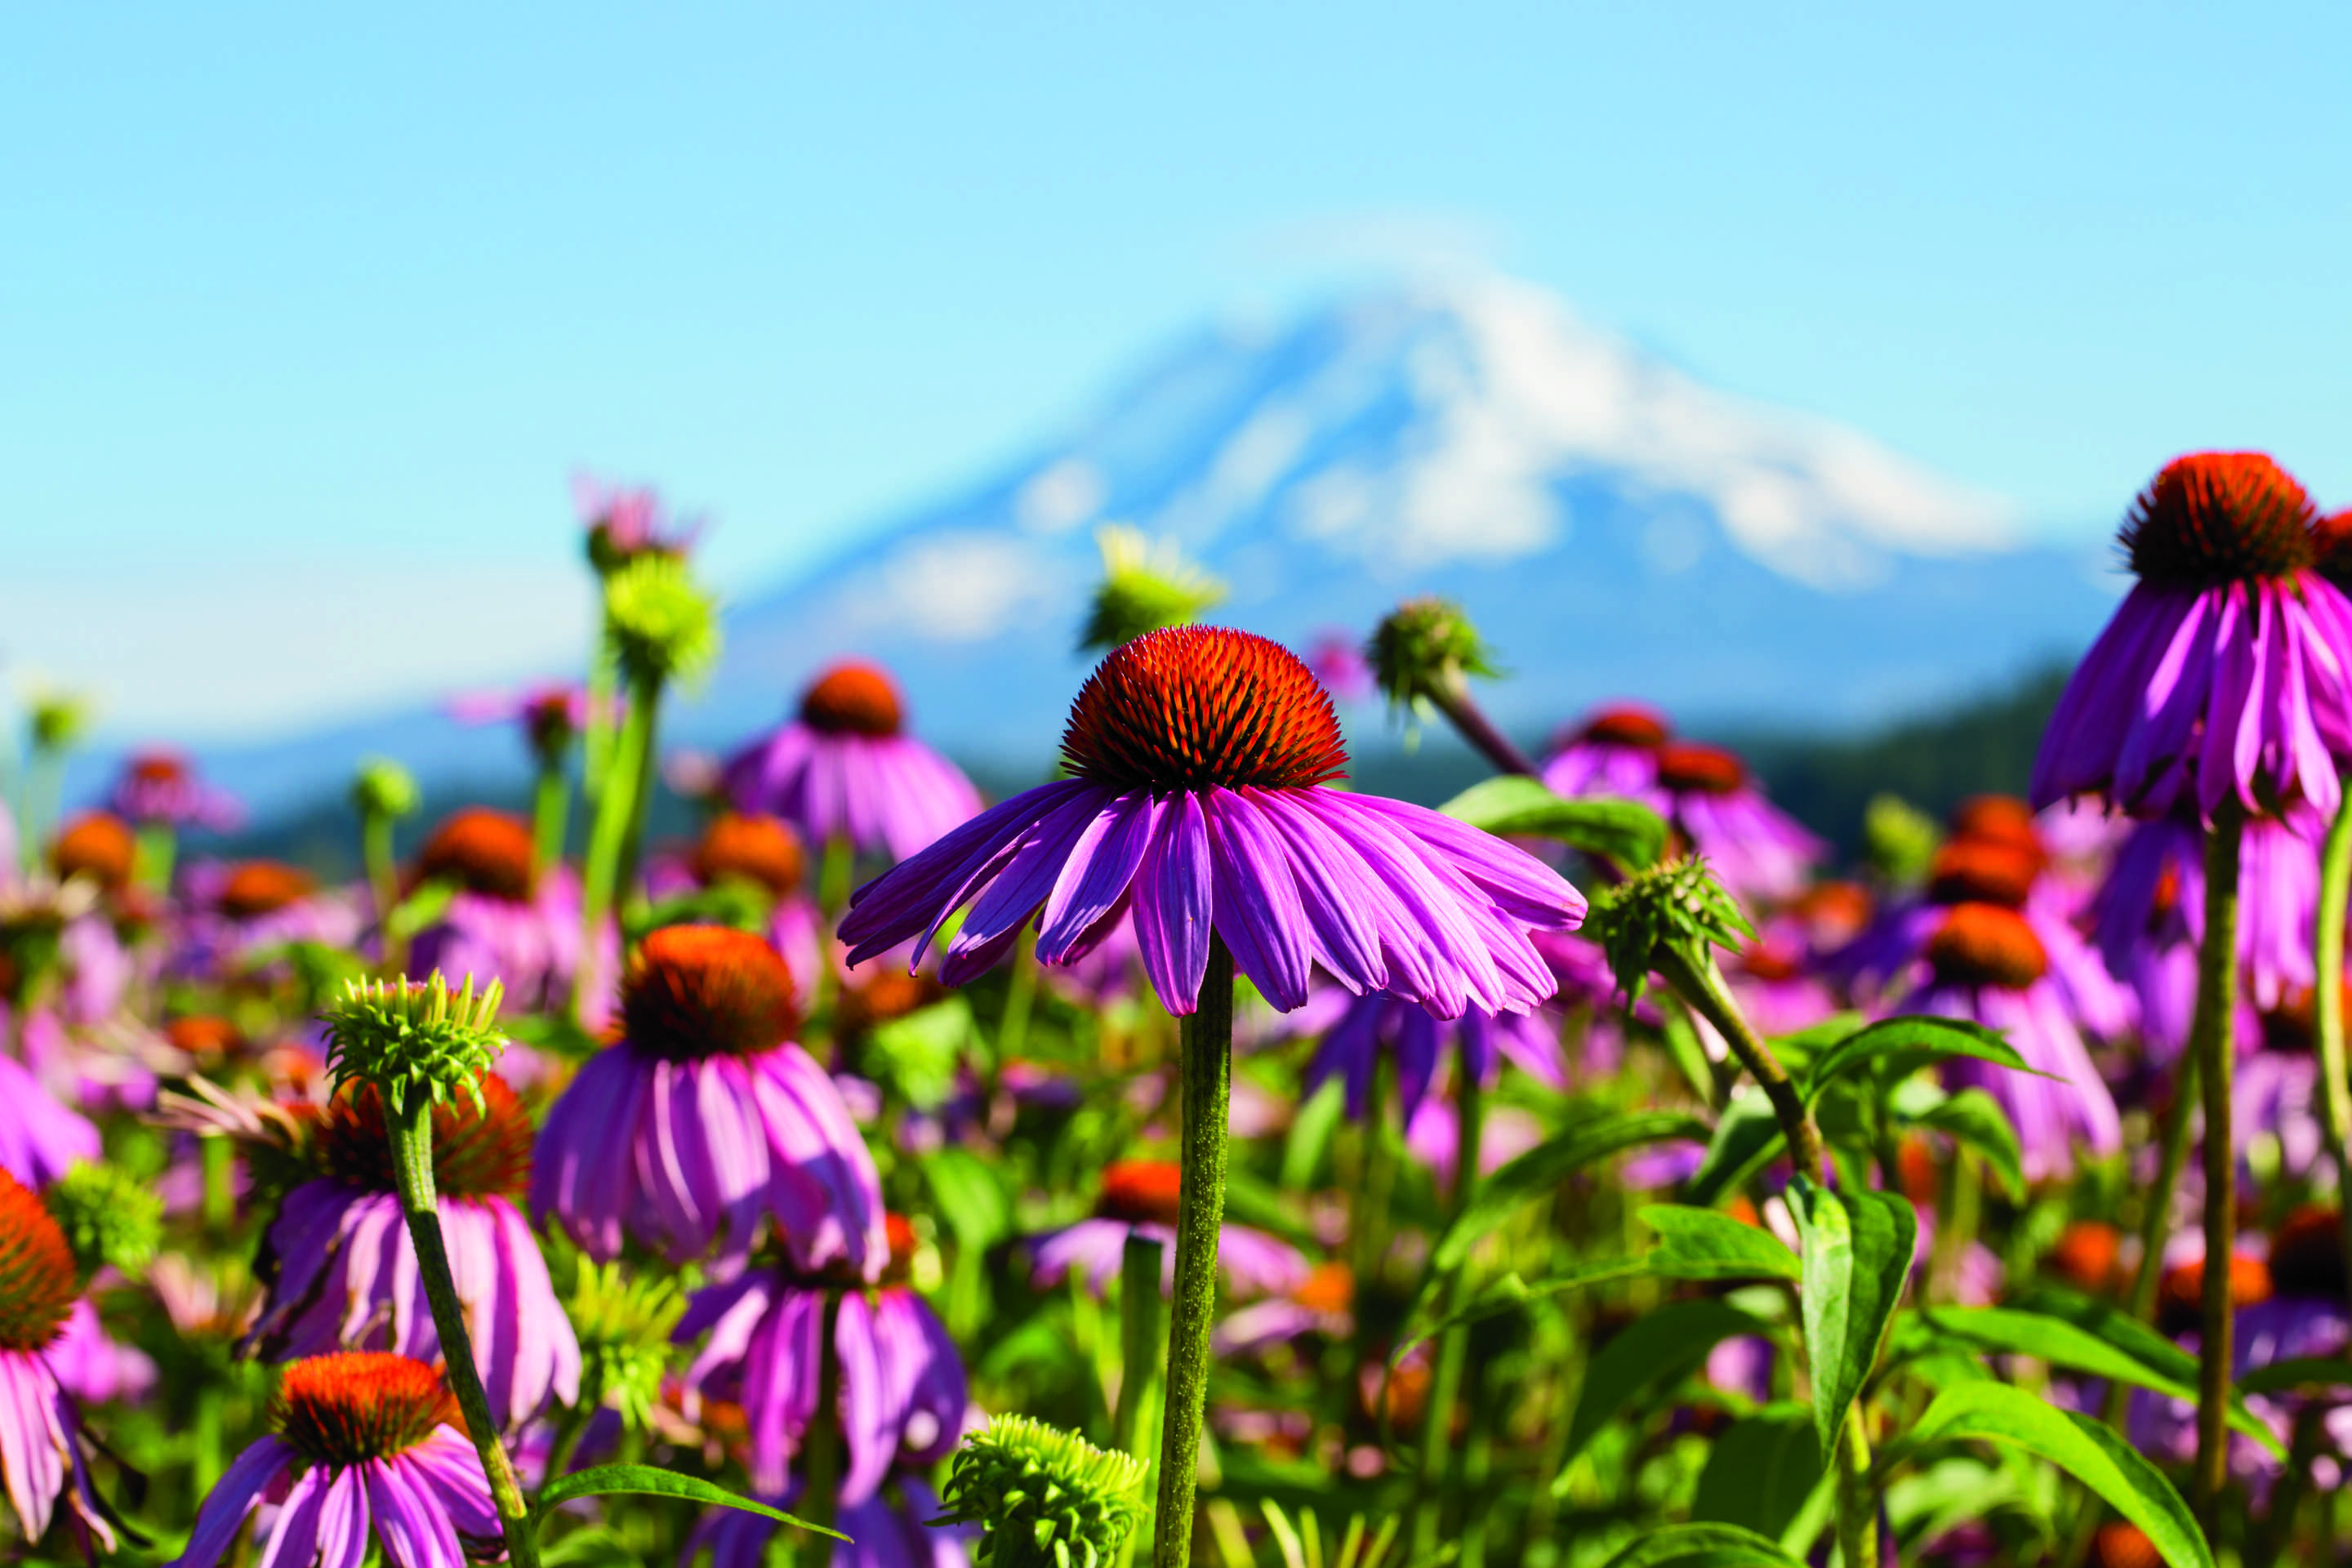 The tranquil beauty of Trout Lake Farm West. Echinacea flowers reach towards the sun while Mount Adams stands guard in the background. Trout Lake, WA; 2015.